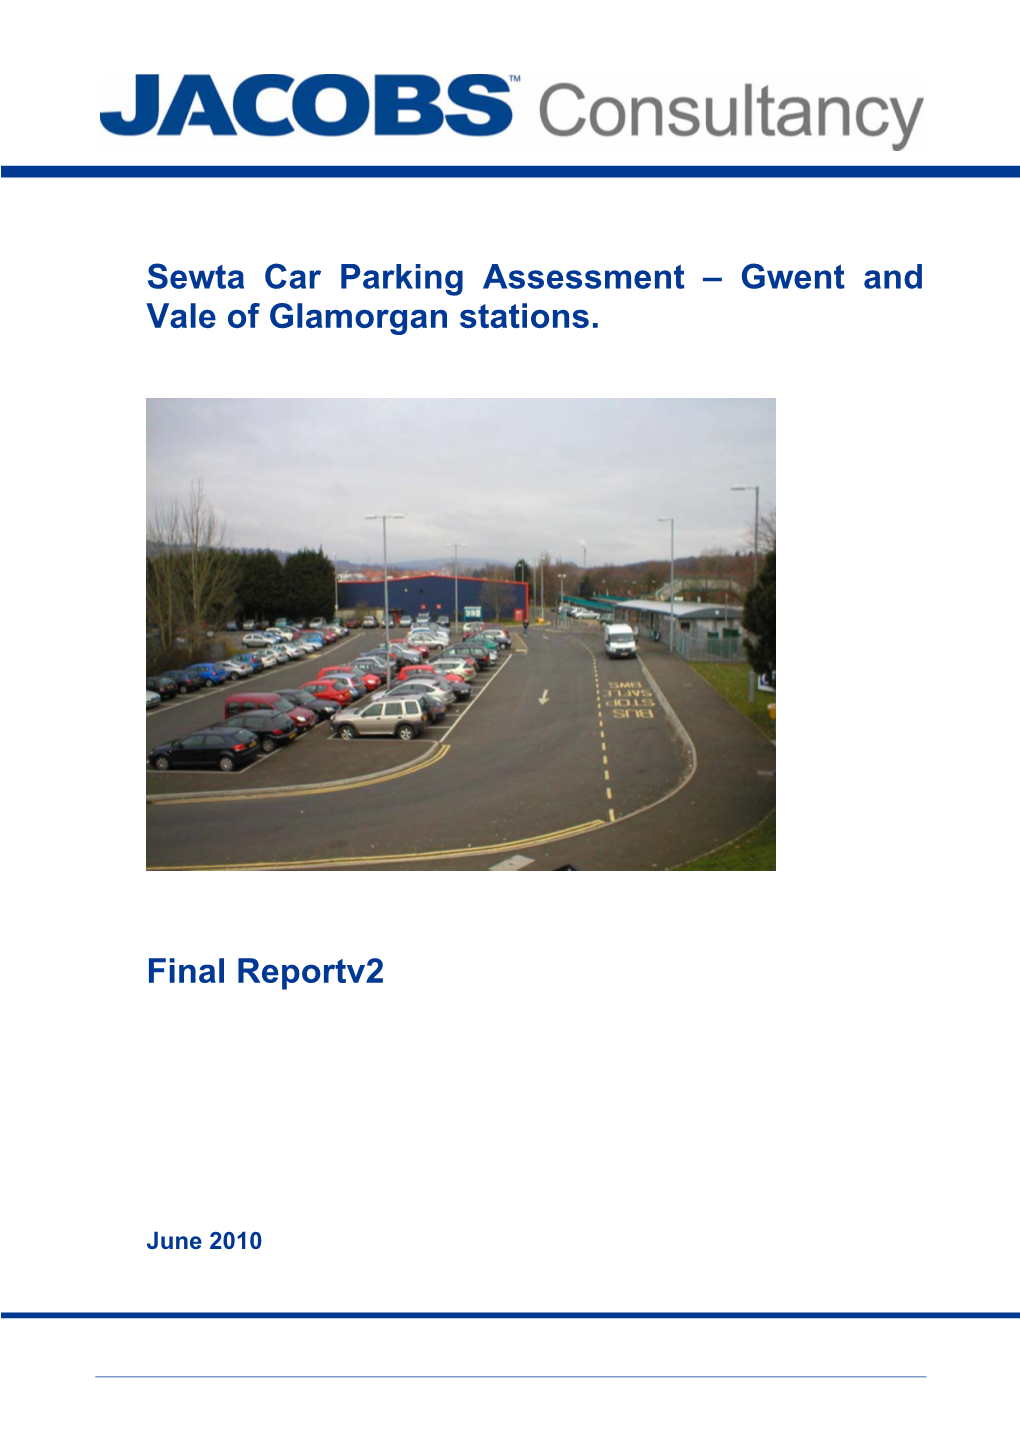 Sewta Car Parking Assessment at Stations